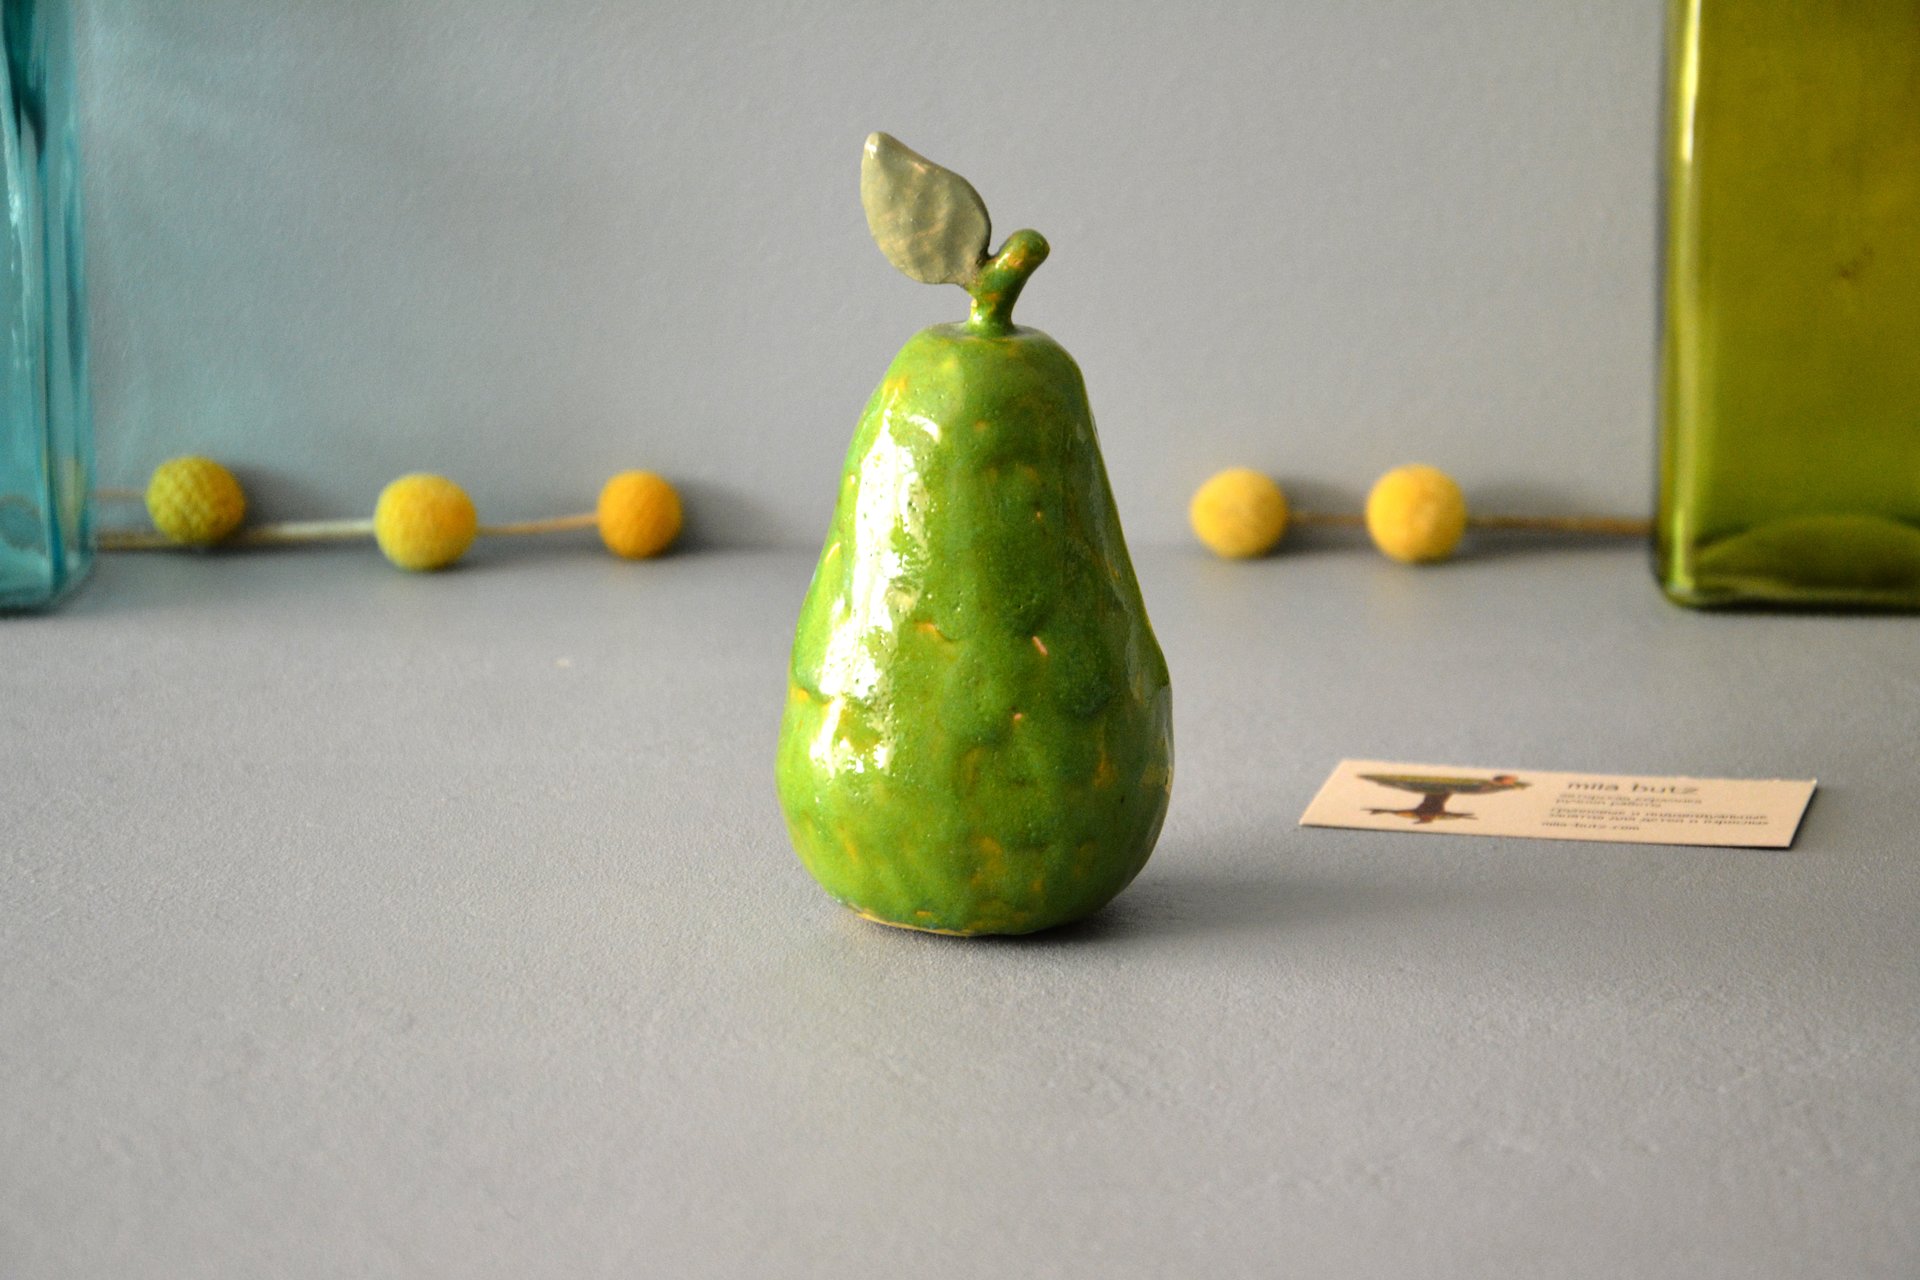 Pear with Love - Ceramic other figures, height - 12 cm, photo 3 of 5.